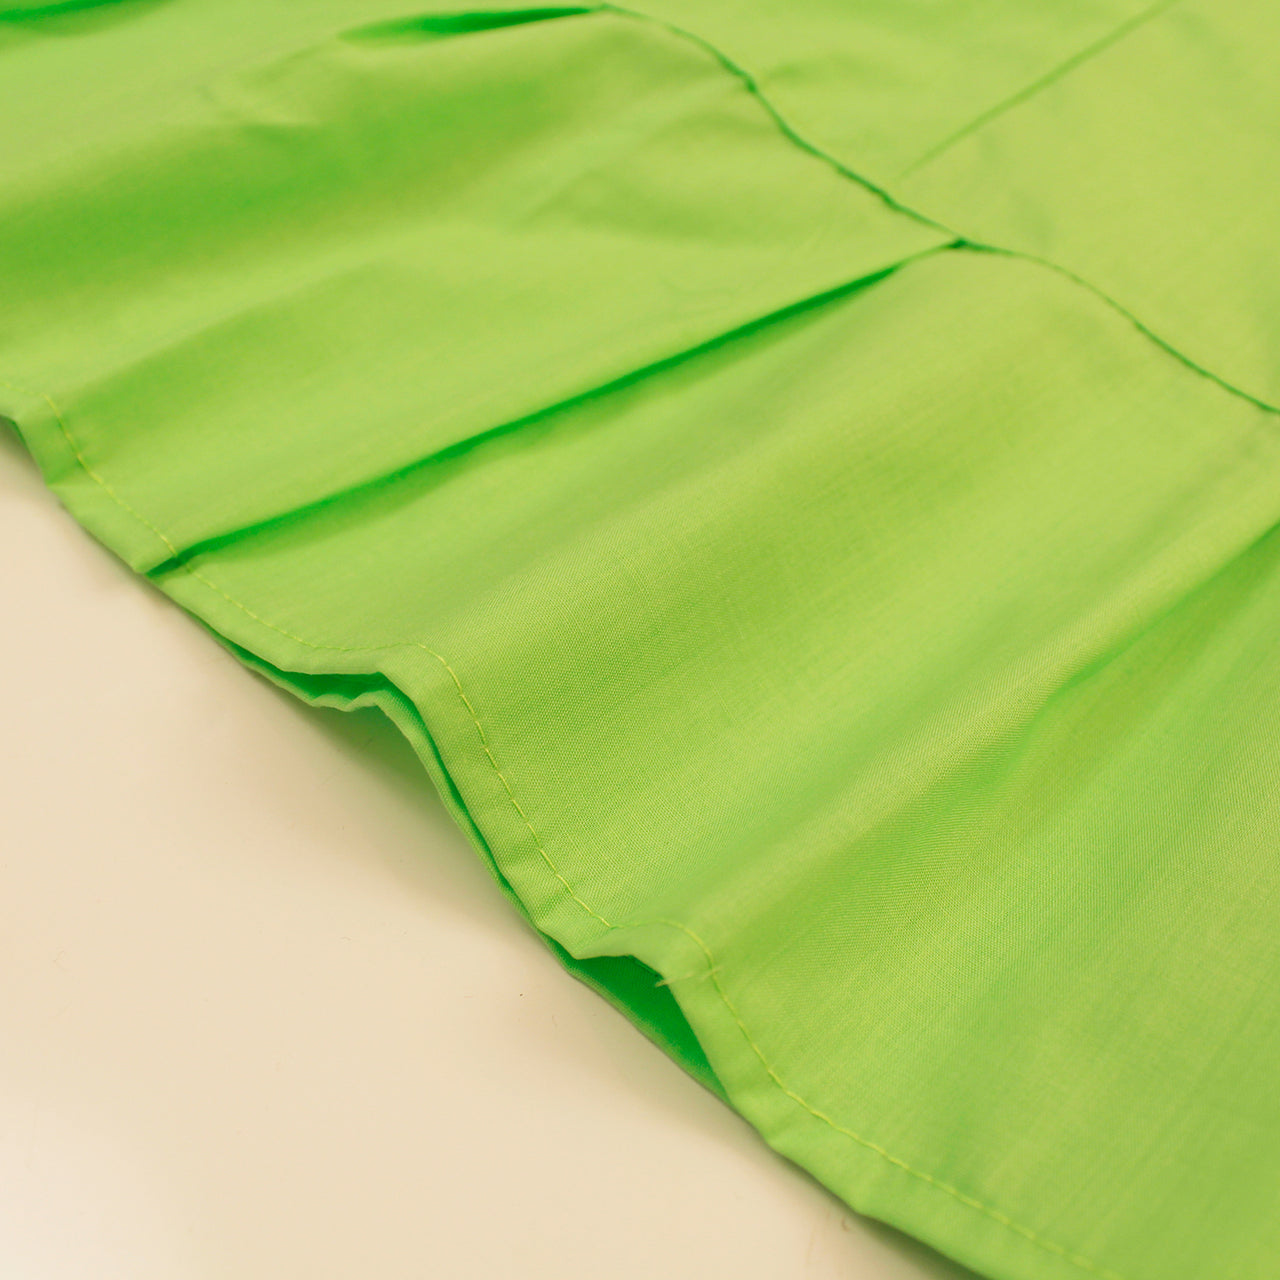 Lime Green - Sari (Saree) Petticoat - Available in S, M, L & XL - Underskirts For Sari's